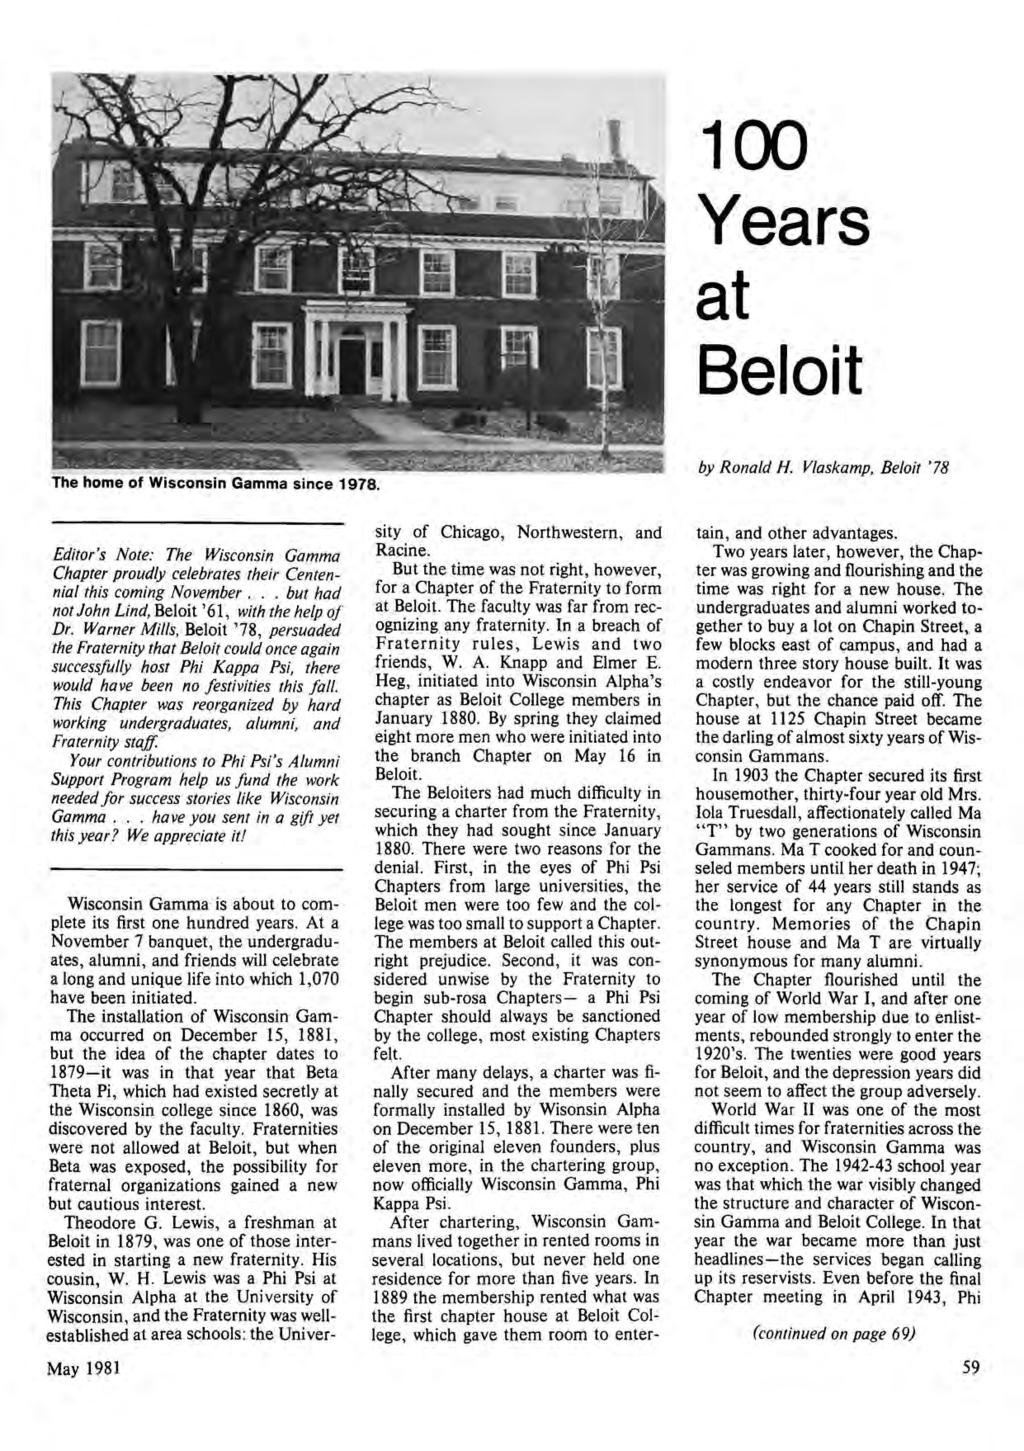 100 Years at Beloit The home of Wisconsin Gamma since 1978. by Ronald H. Vlaskamp, Beloit '78 Editor's Note: The Wisconsin Gamma Chapter proudly celebrates their Centennial this coming November.